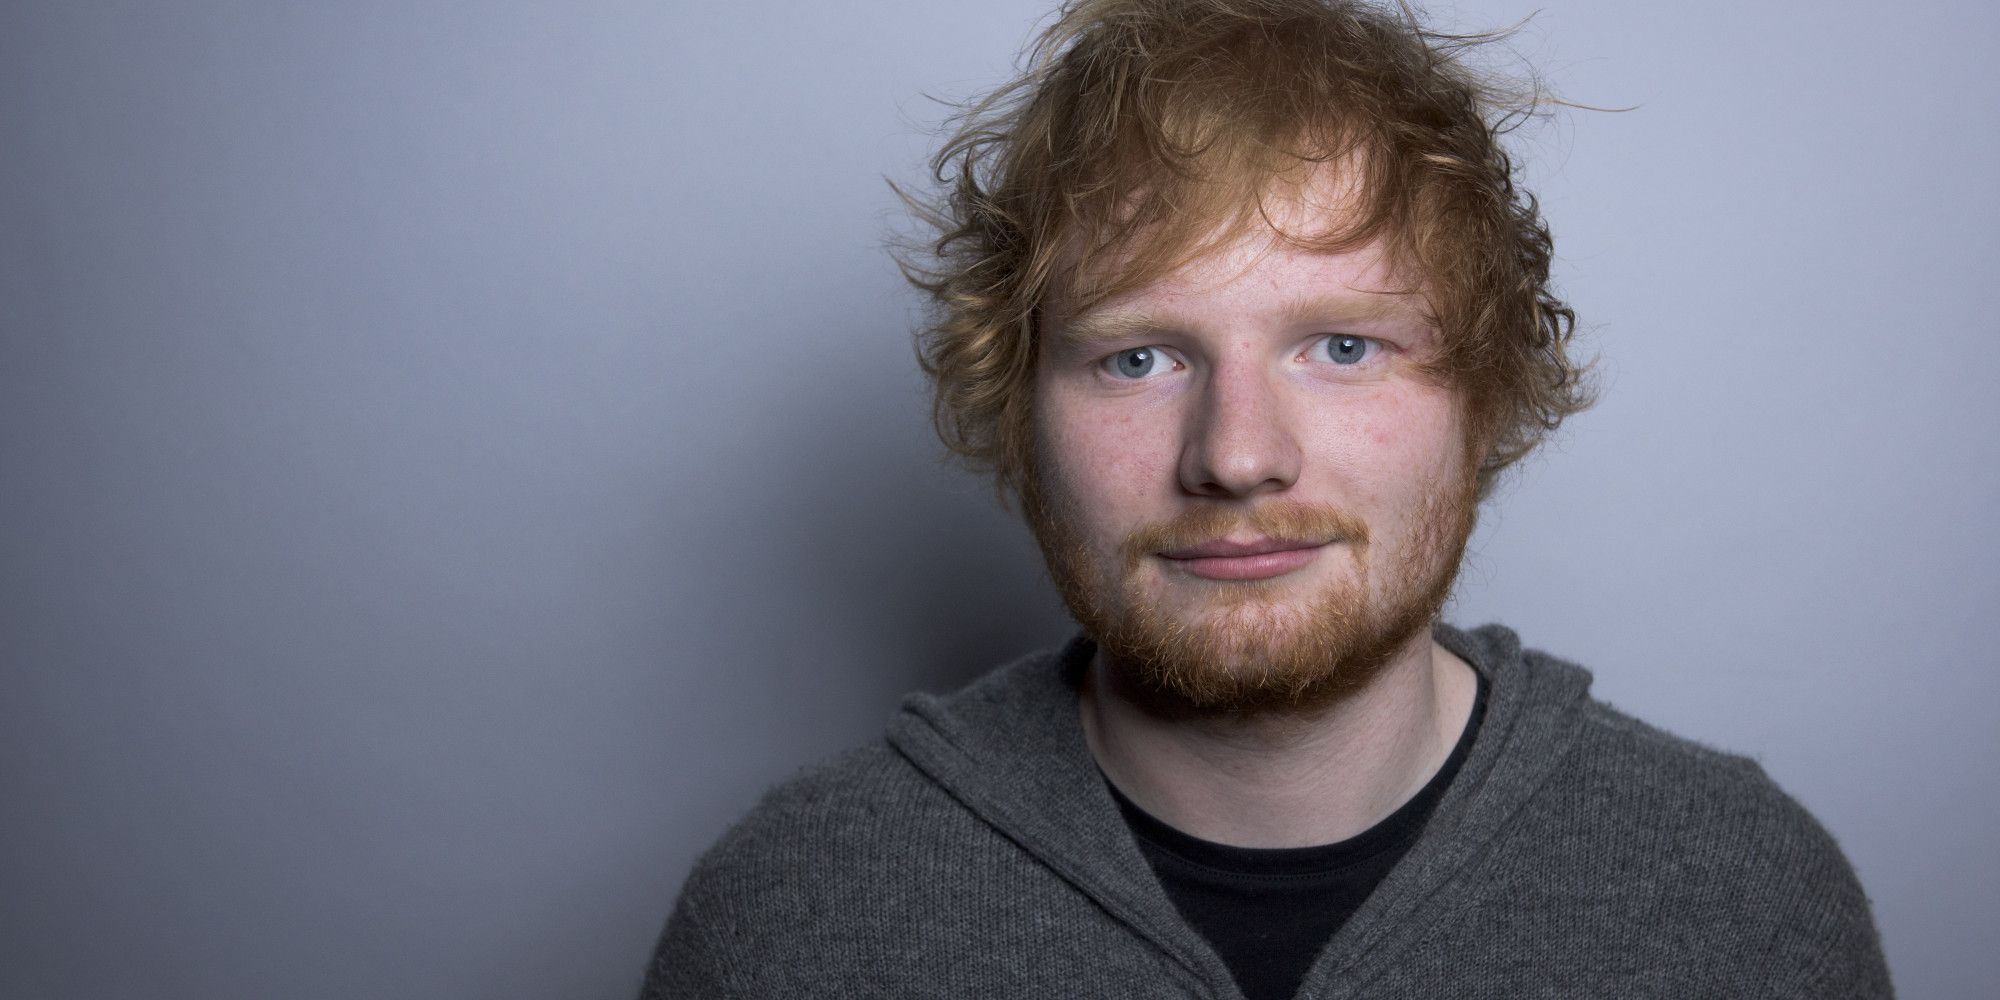 Ed Sheeran concerts will affect traffic close to the airport and the Øresund Bridge